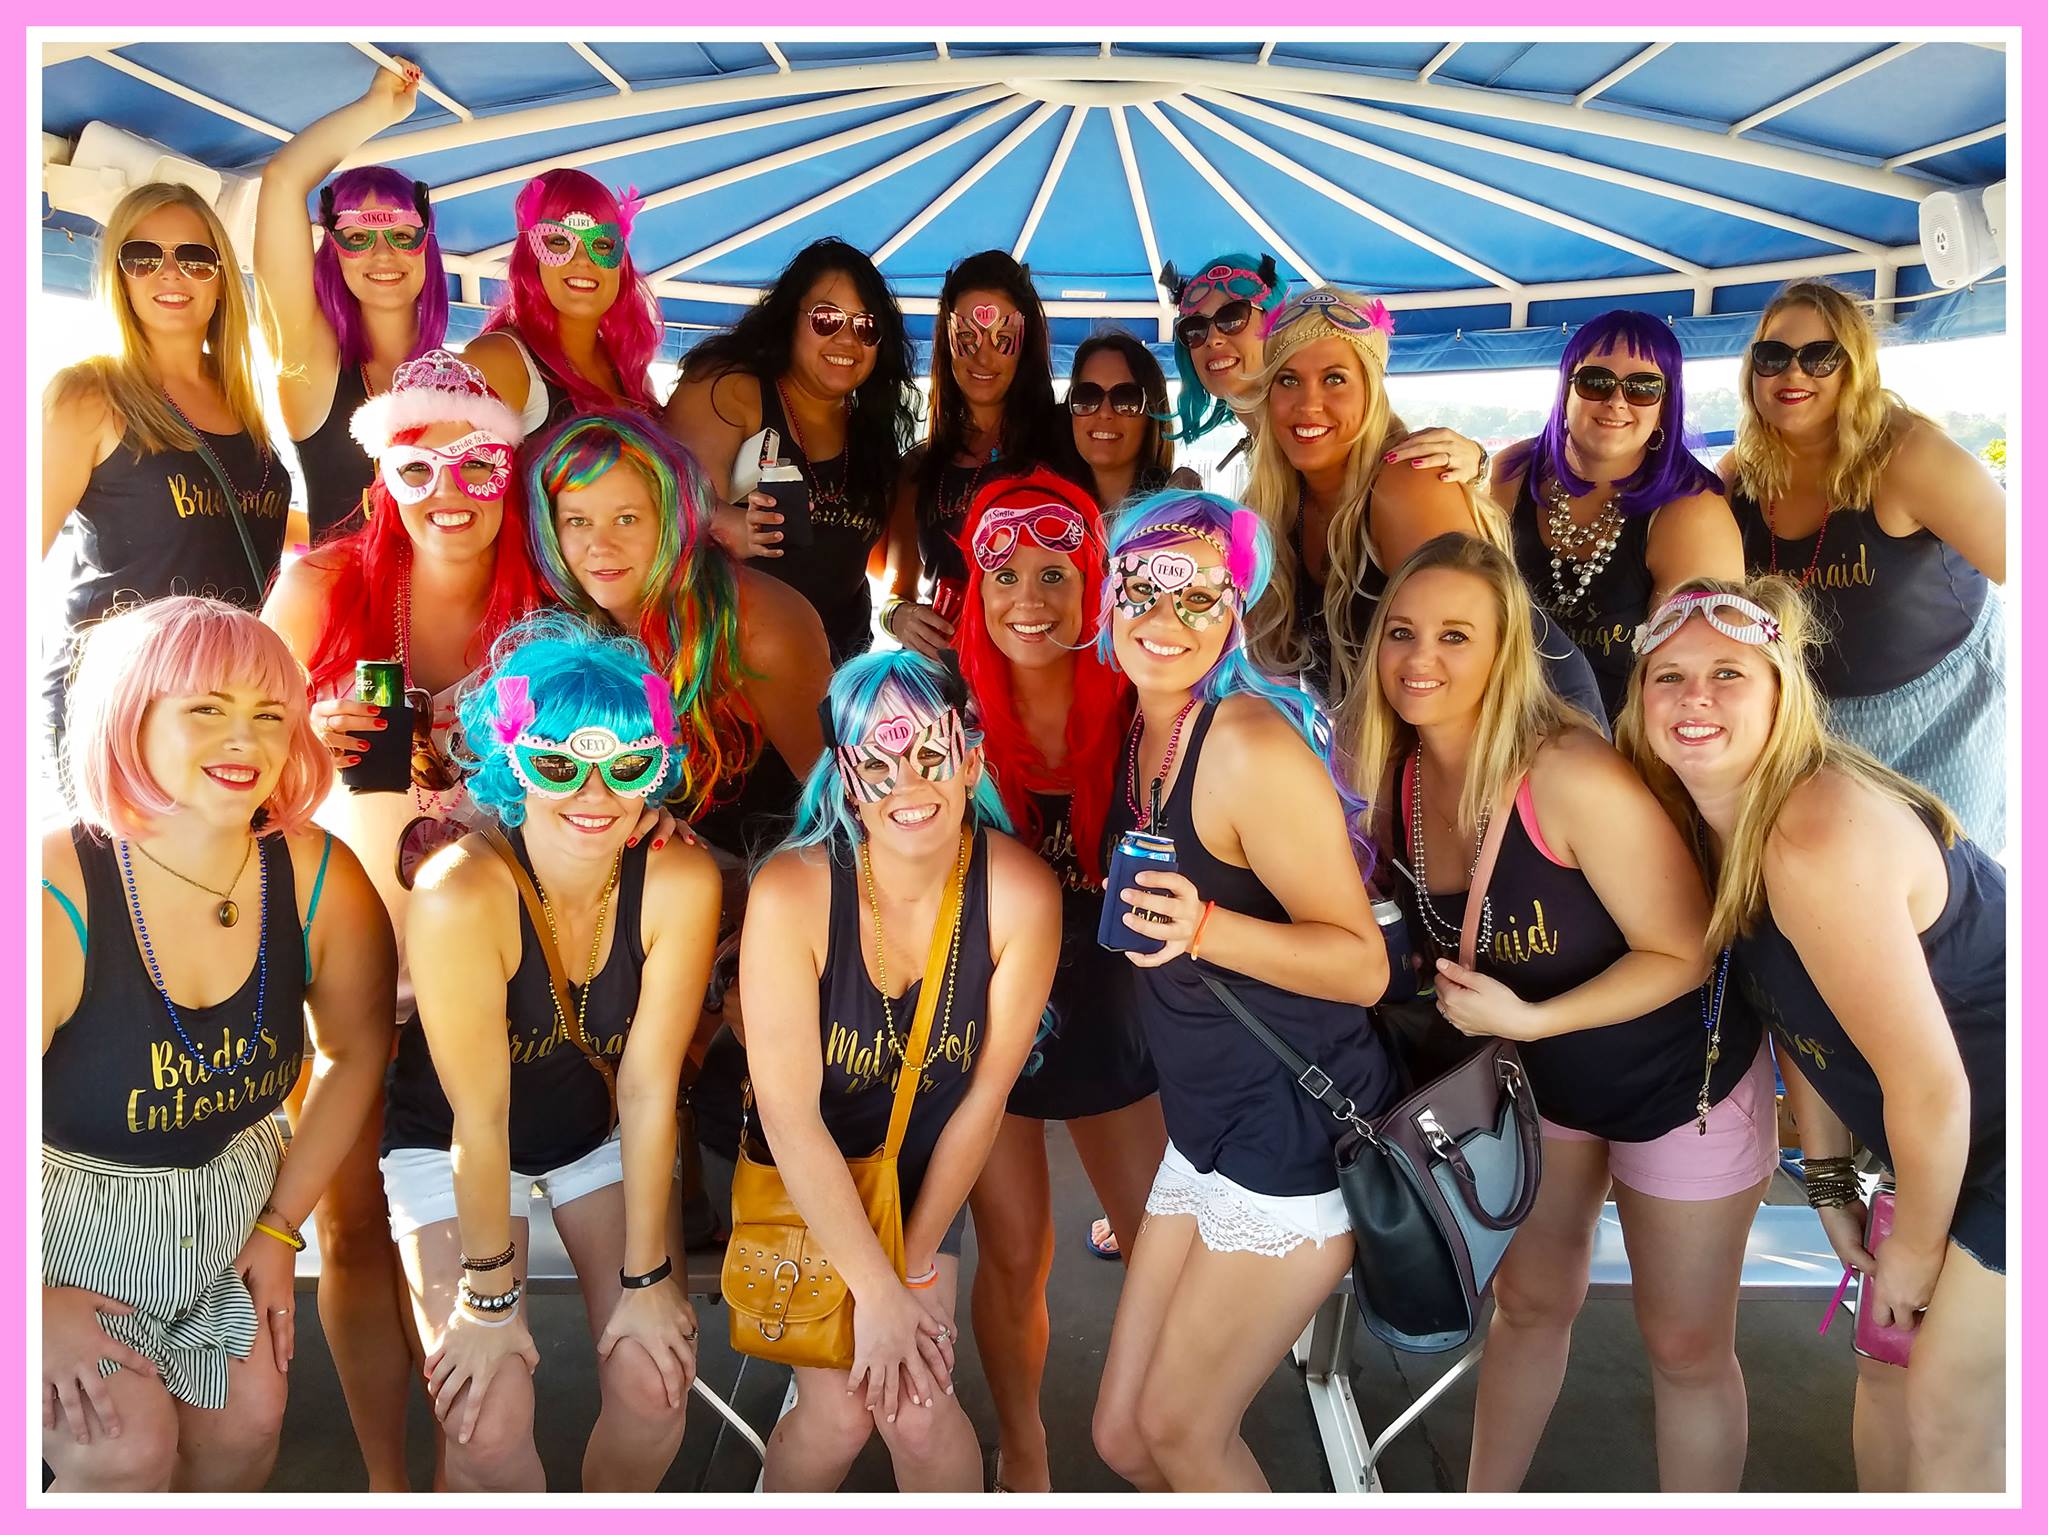 A group of young women celebrating a bachelorette party on Playin Hooky day time cruise, just one of the bachelorette party ideas Lake of the Ozarks offers.